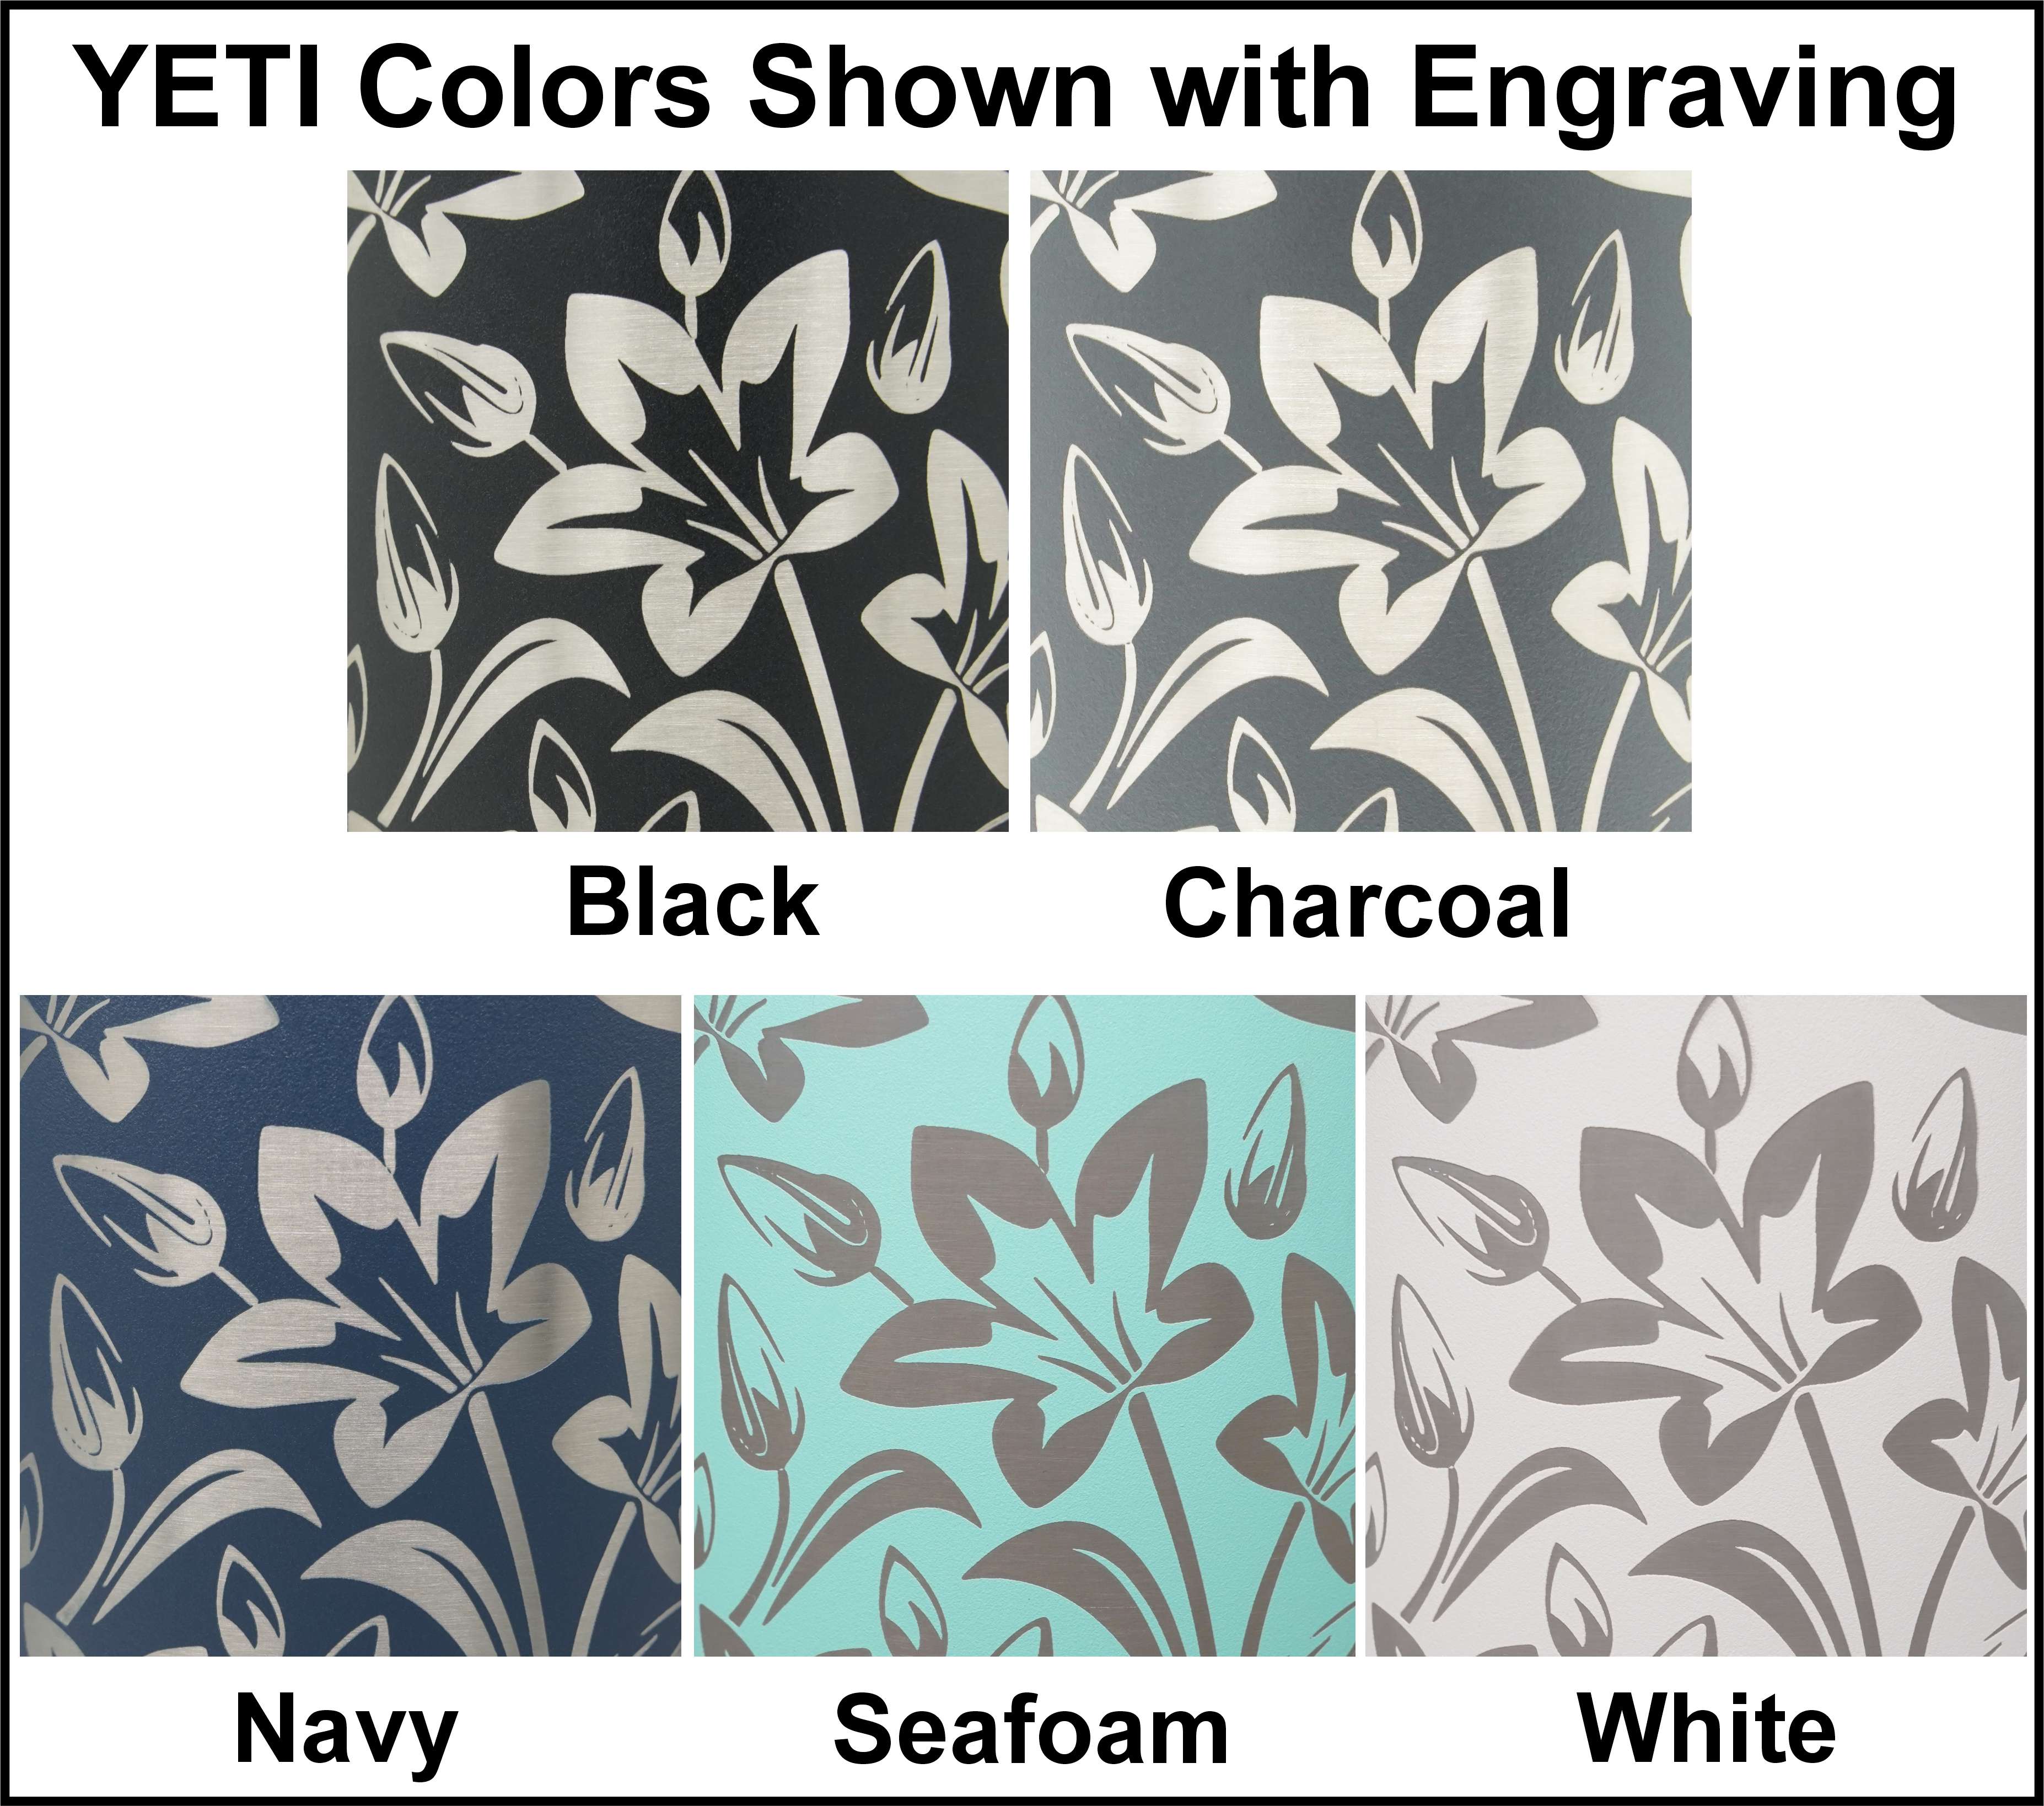 Laser engraved lily flower pattern shown in each Yeti tumbler color.